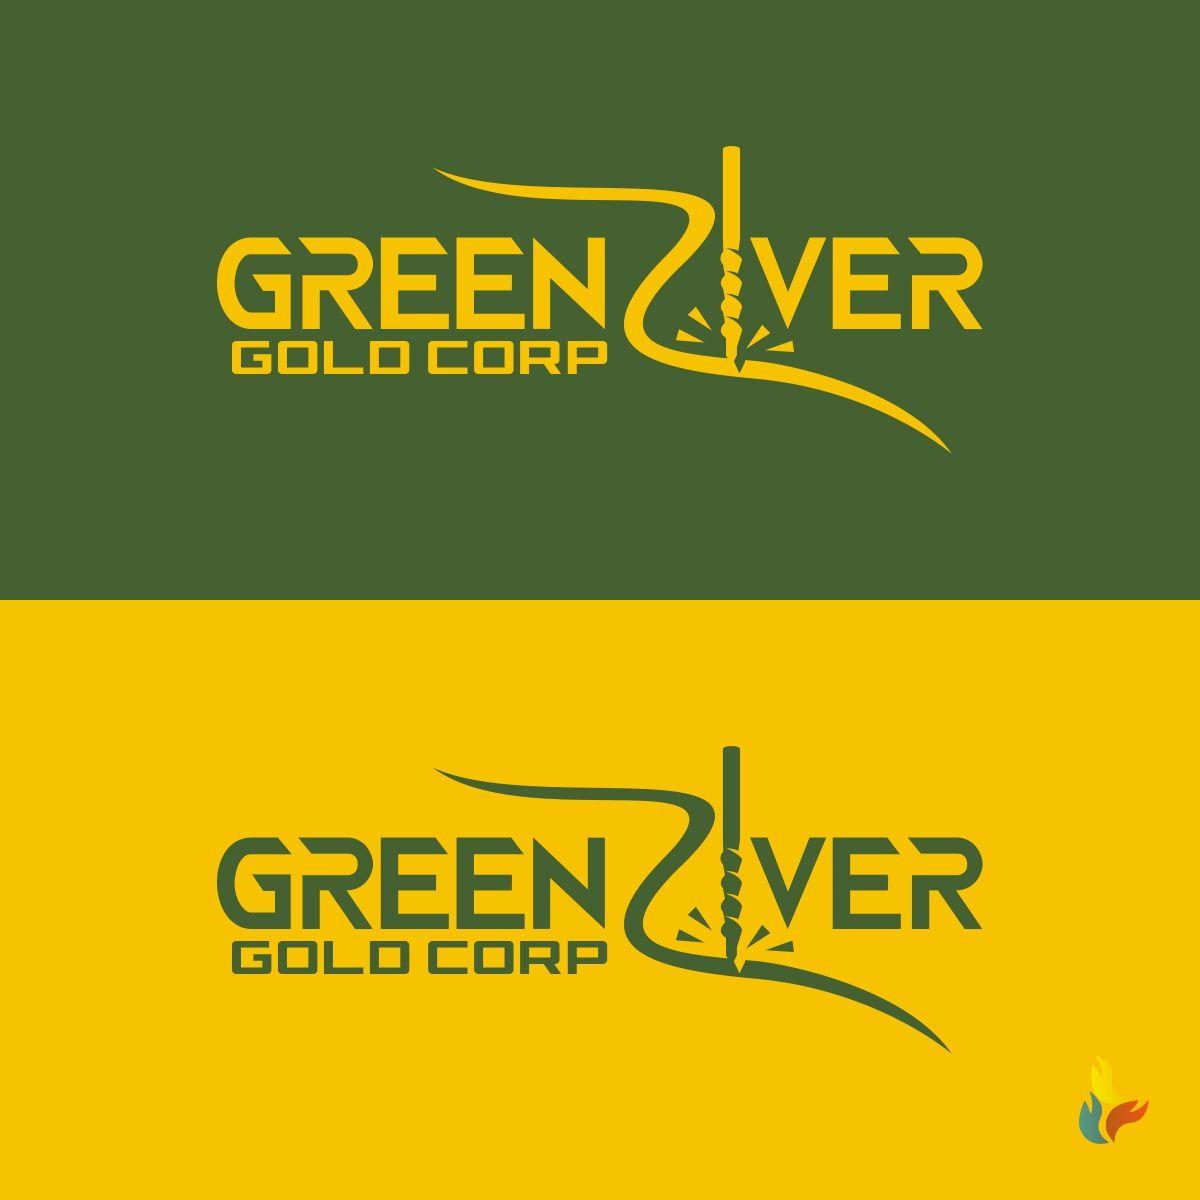 Yellow Corp Logo - Professional, Bold, It Company Logo Design for Green River Gold Corp